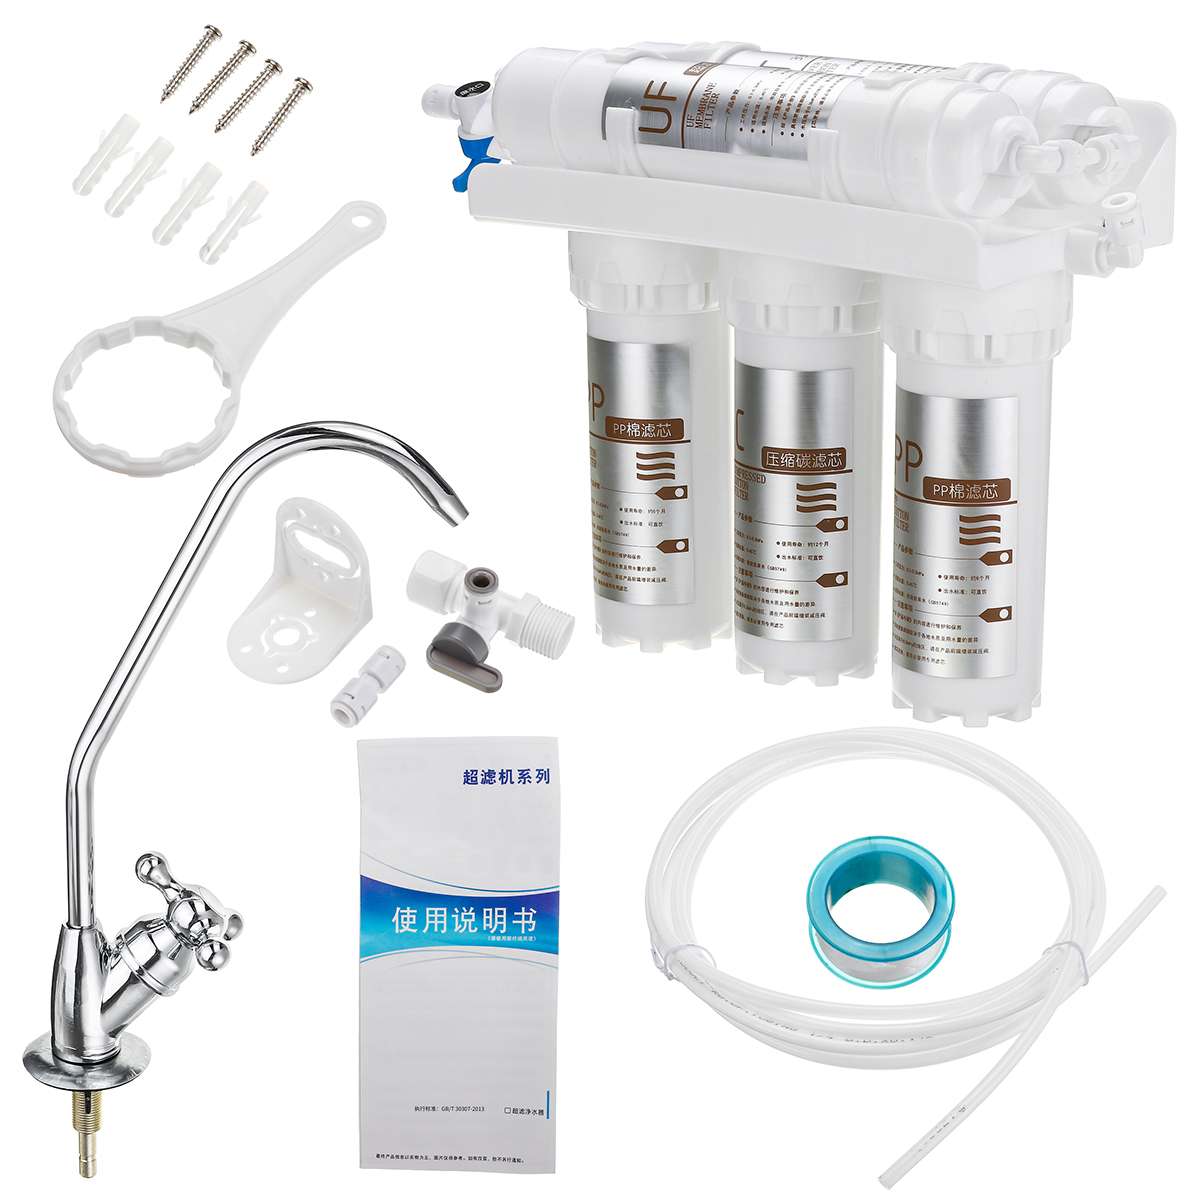 5pc/set 3+2 Ultrafiltration Drinking Water Filter System Home Kitchen Water Purifier With Faucet Tap Water Filter Cartridge Kits